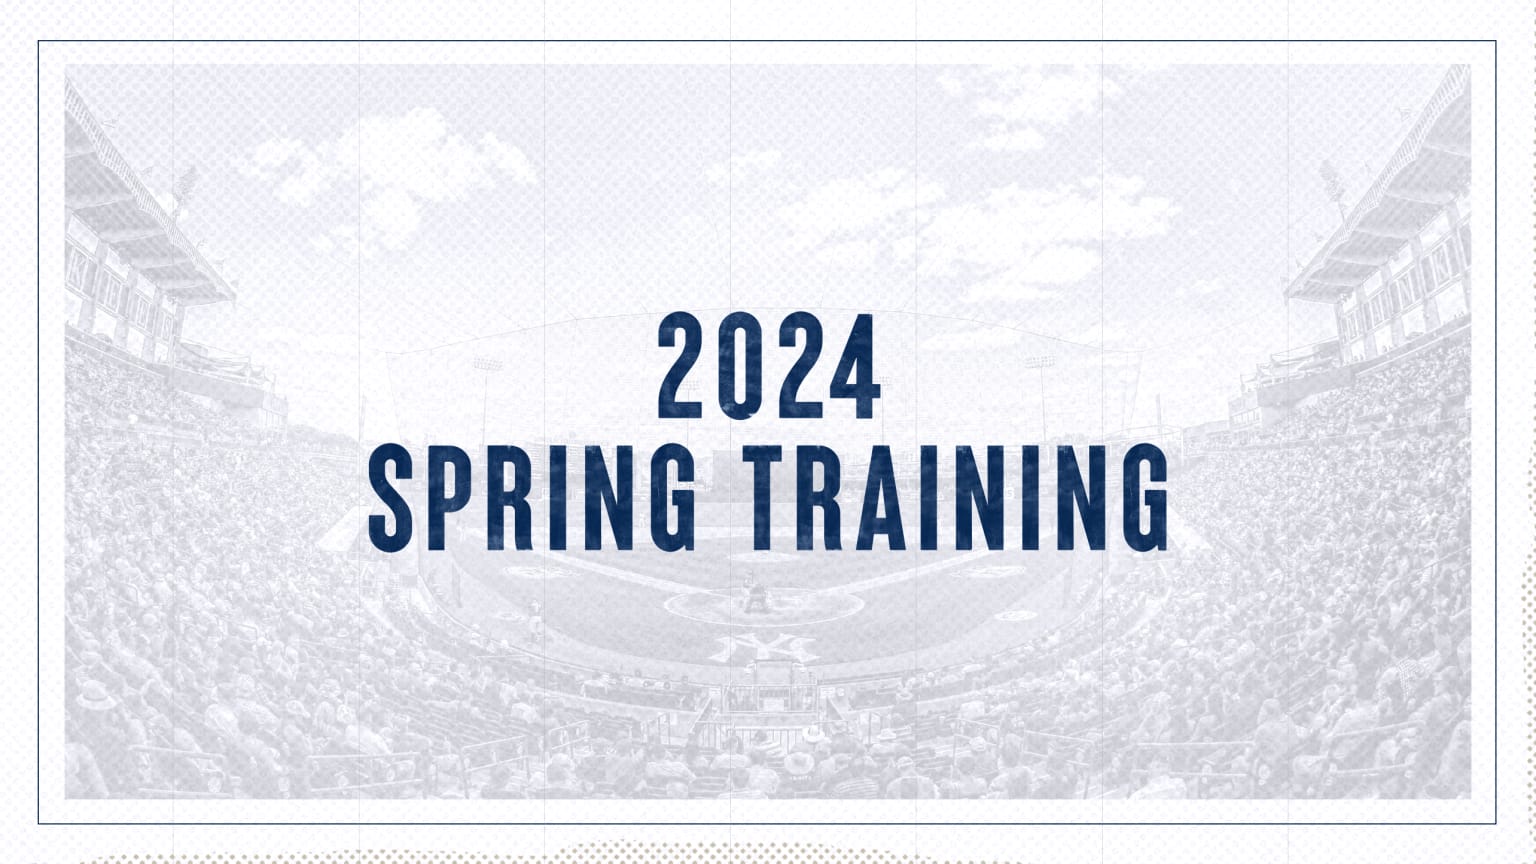 New York Yankees on X: The 2023 Spring Training Schedule is here